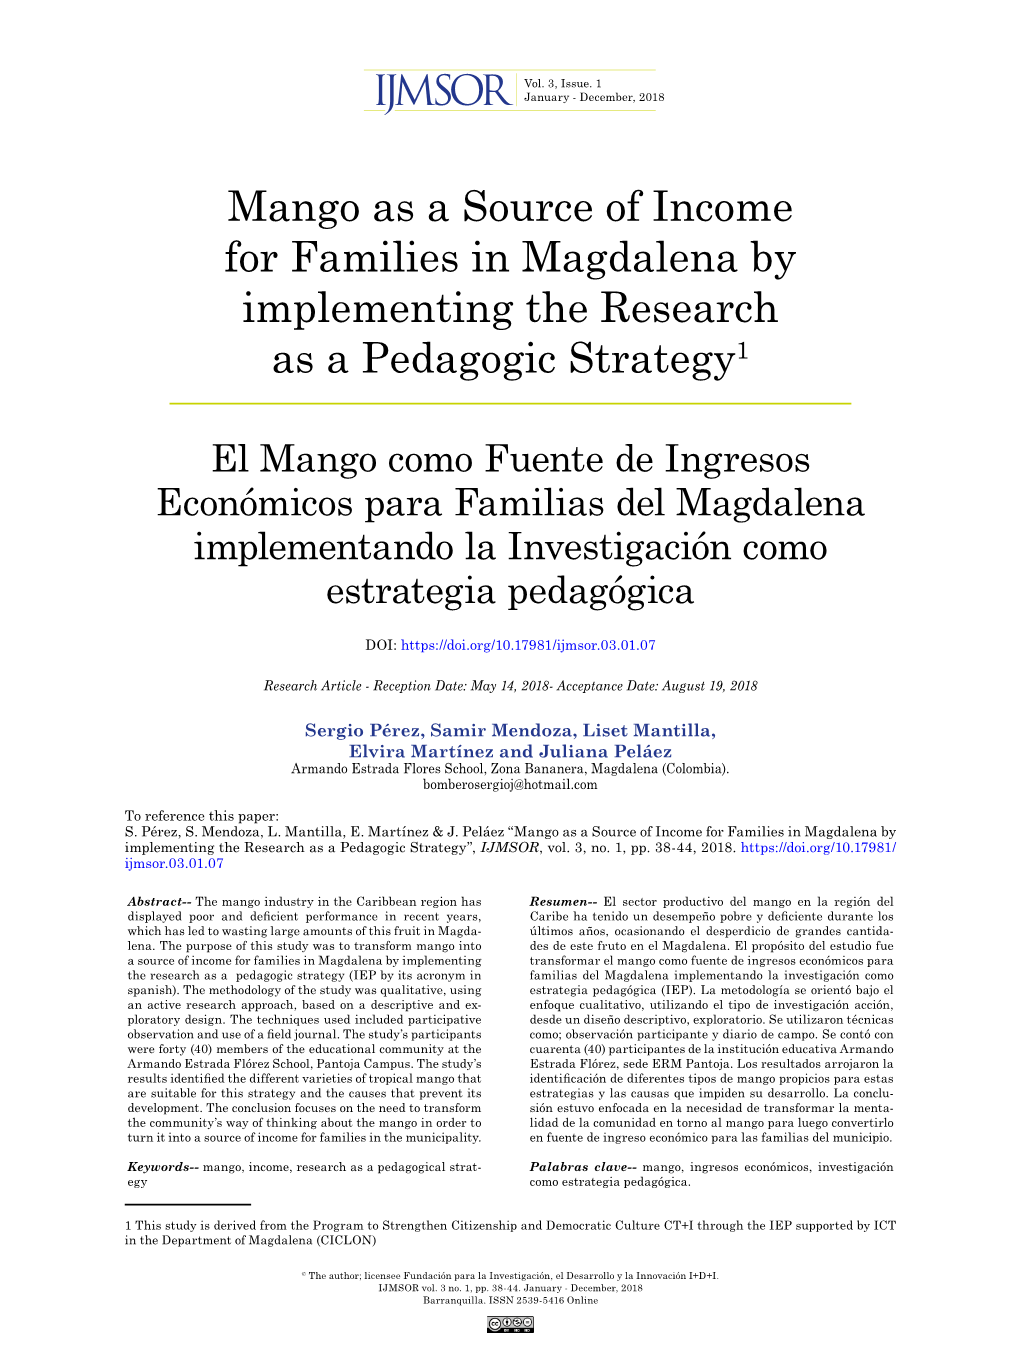 Mango As a Source of Income for Families in Magdalena by Implementing the Research As a Pedagogic Strategy1